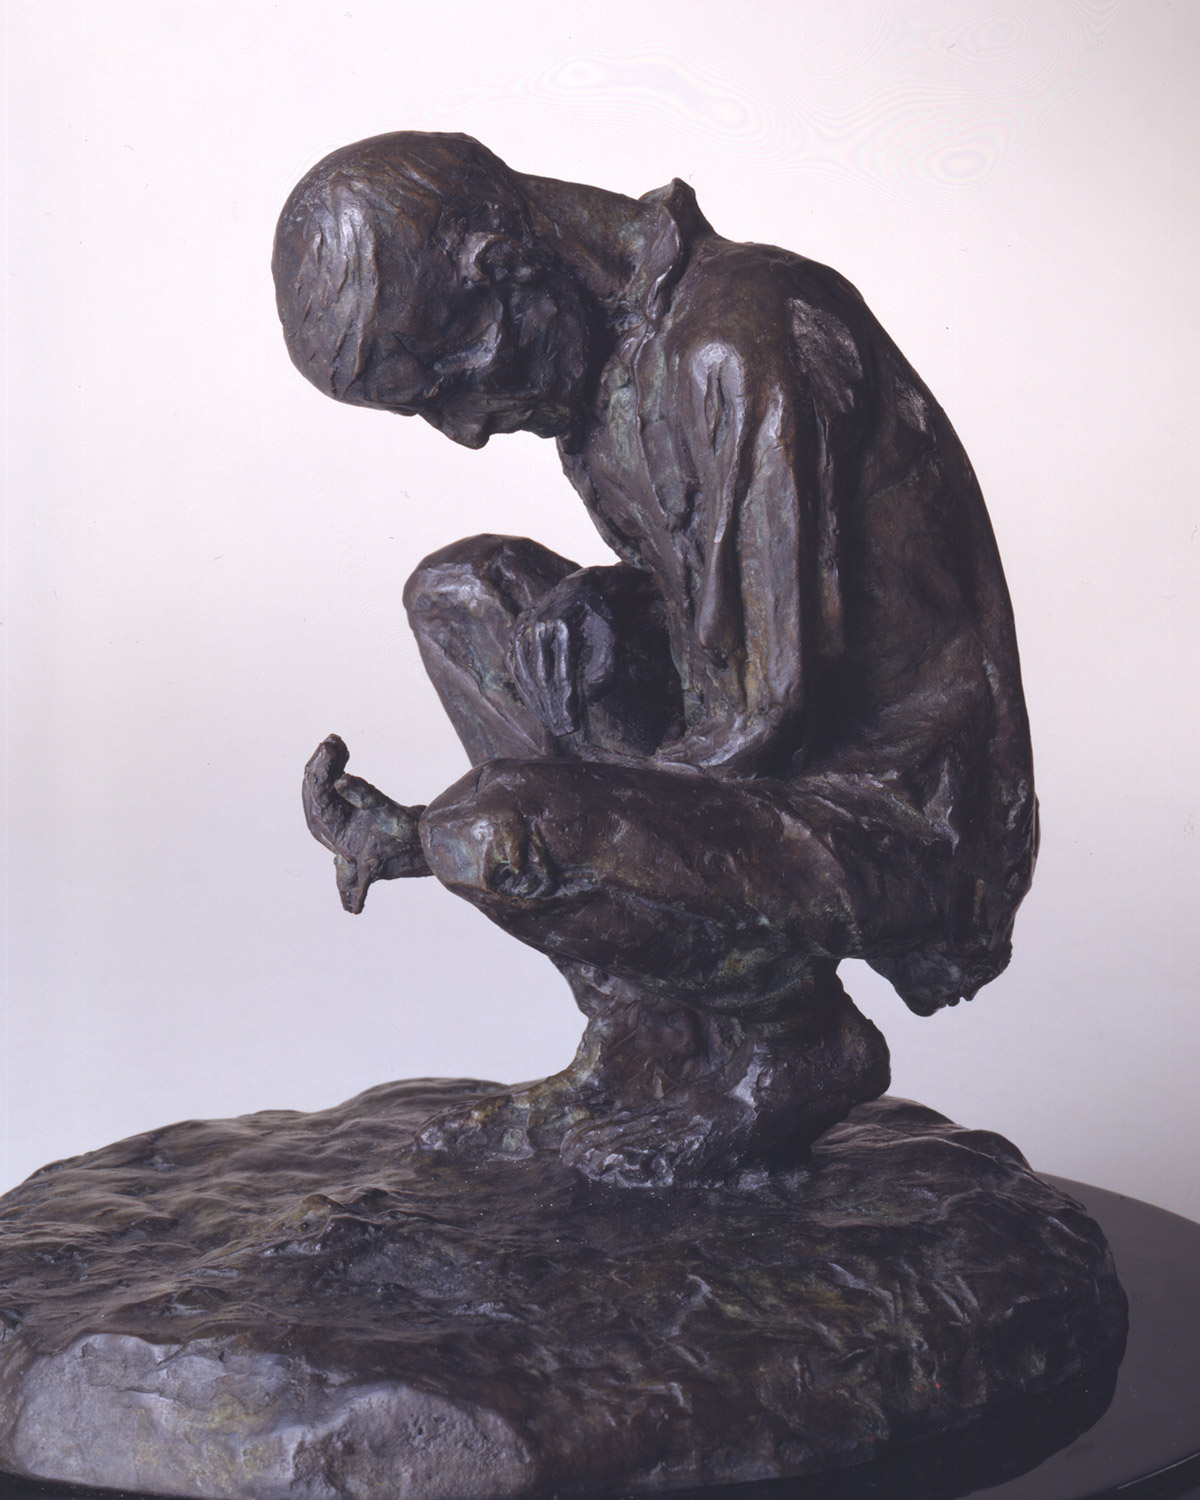 A photo of a sculpture entitled "Man Sifting Through Soil" by the artist Margaret Lyster Chamberlain